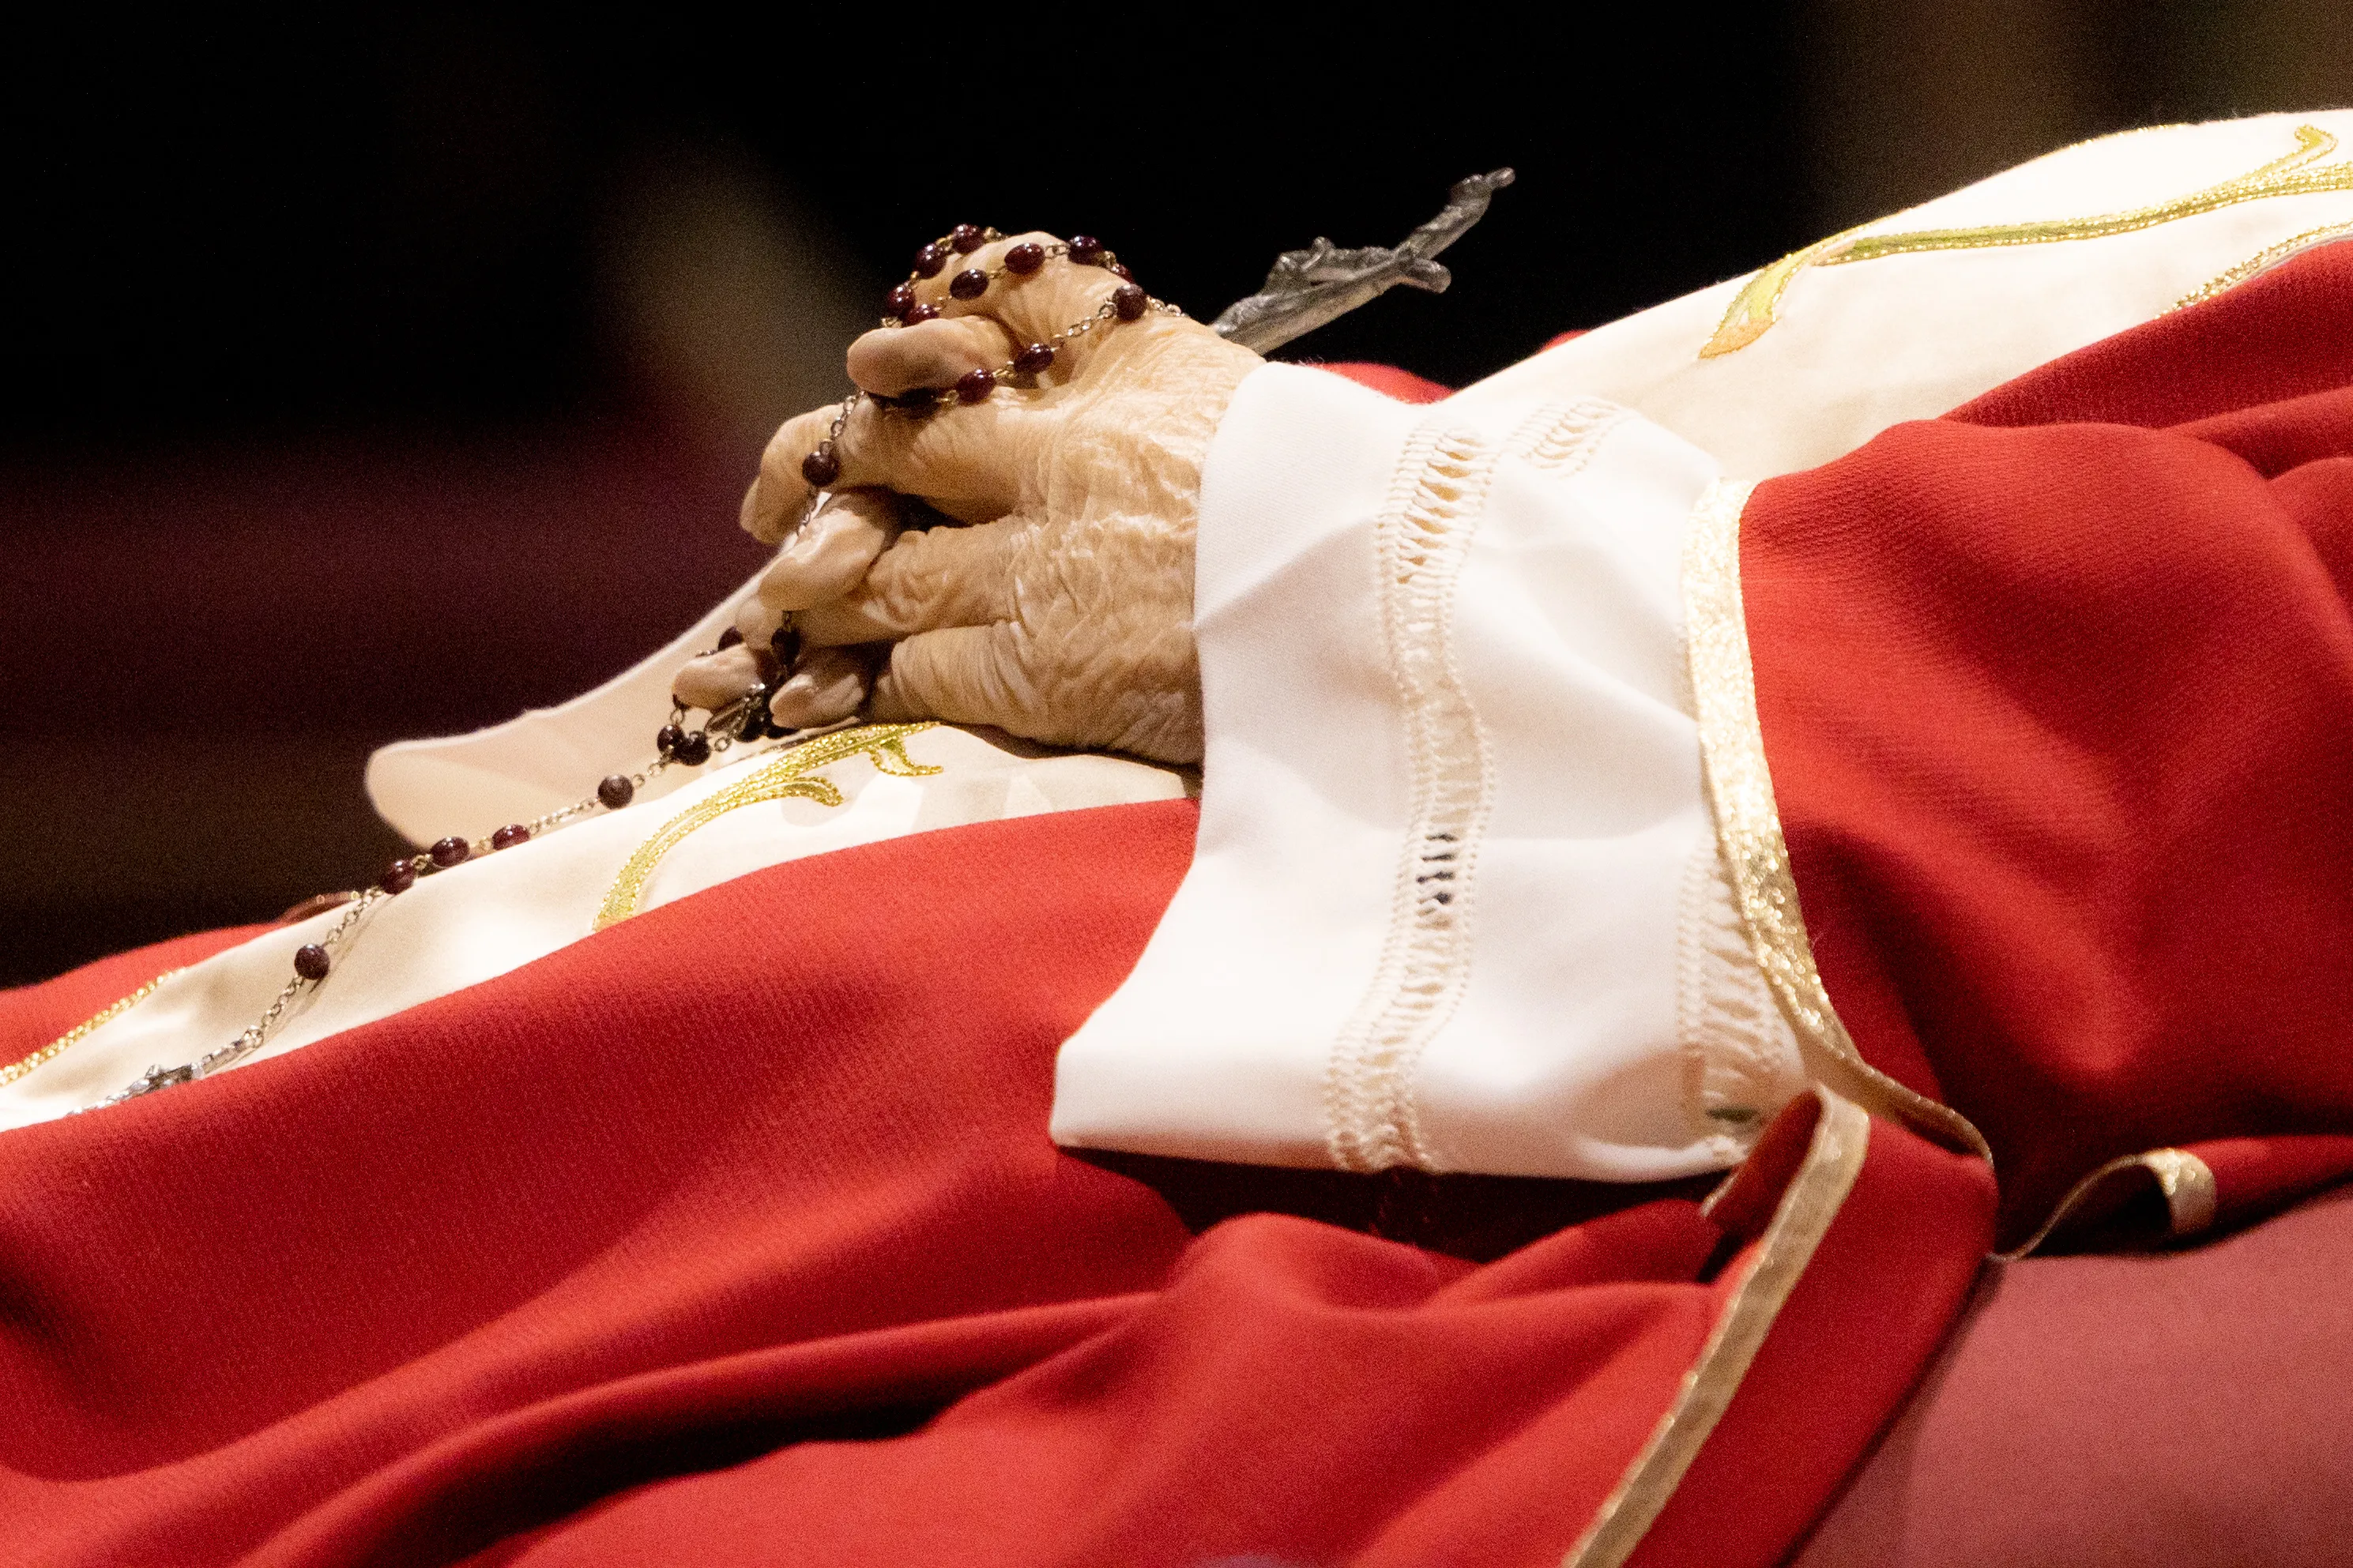 Rosary beads entwined in the hands of the late Pope Emeritus Benedict XVI as his body lies in state on Jan. 3, 2023, in St. Peter's Basilica.?w=200&h=150